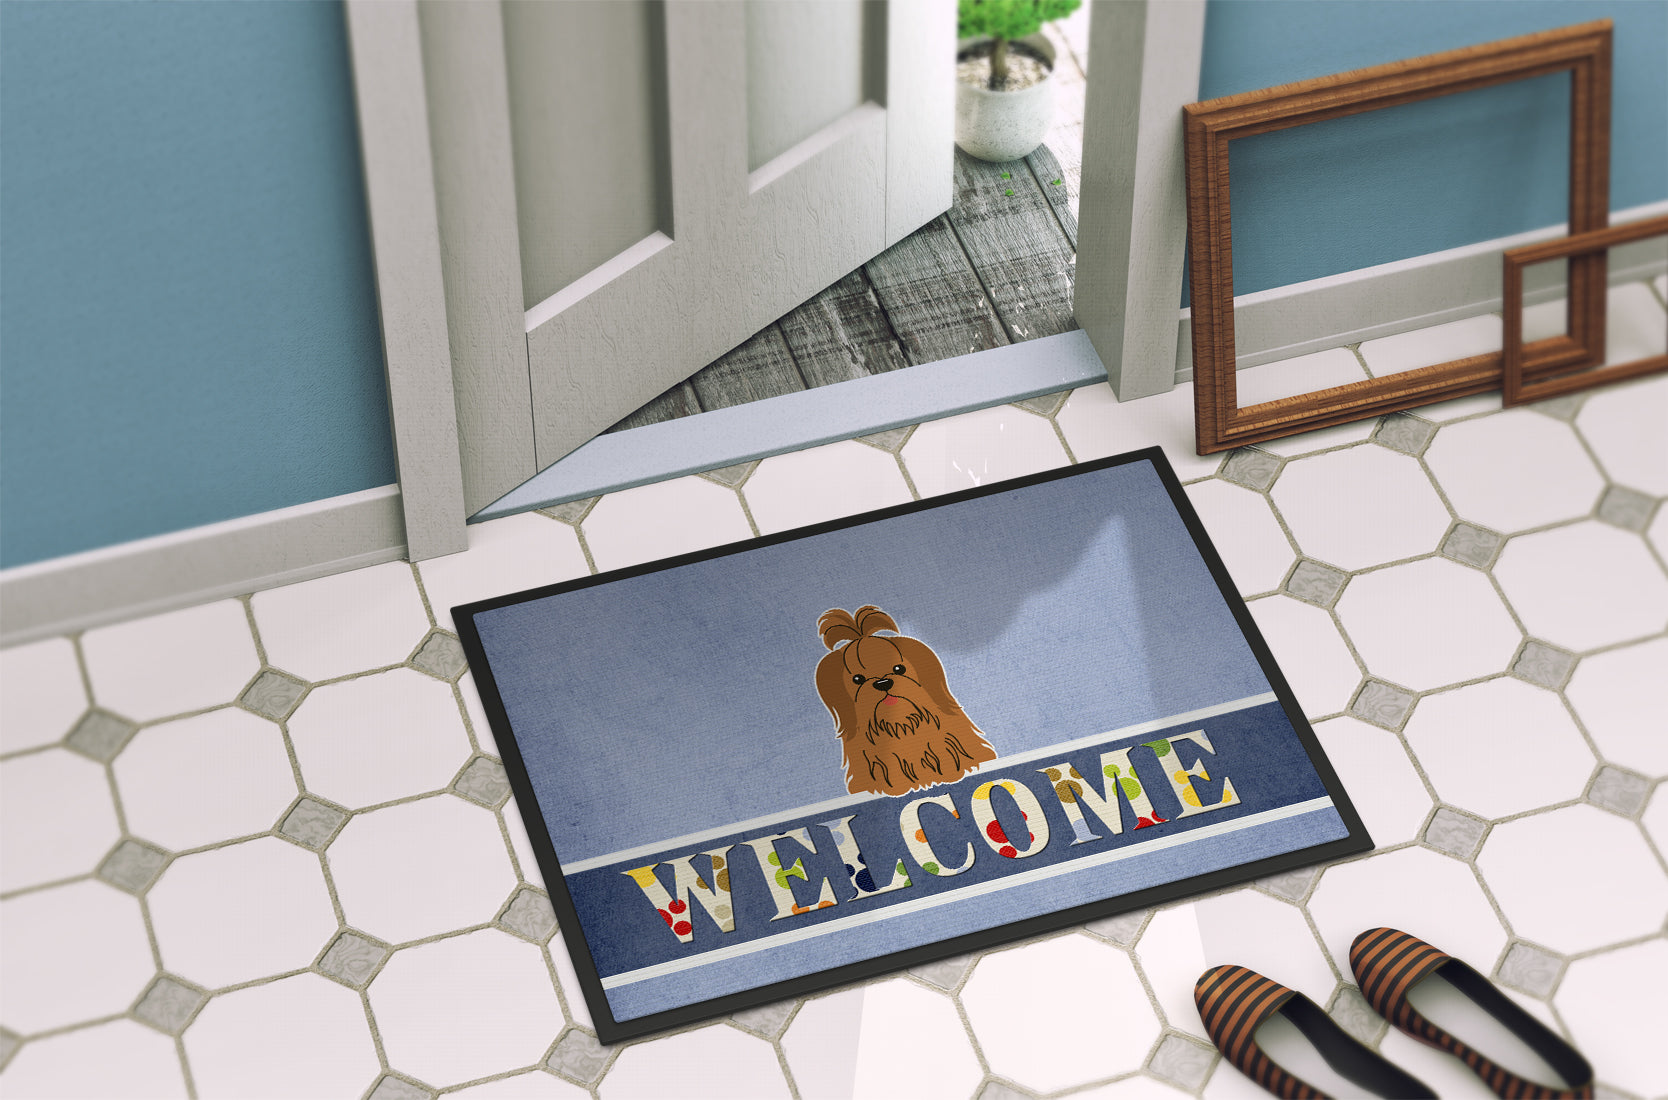 Shih Tzu Silver Chocolate Welcome Indoor or Outdoor Mat 18x27 BB5667MAT - the-store.com